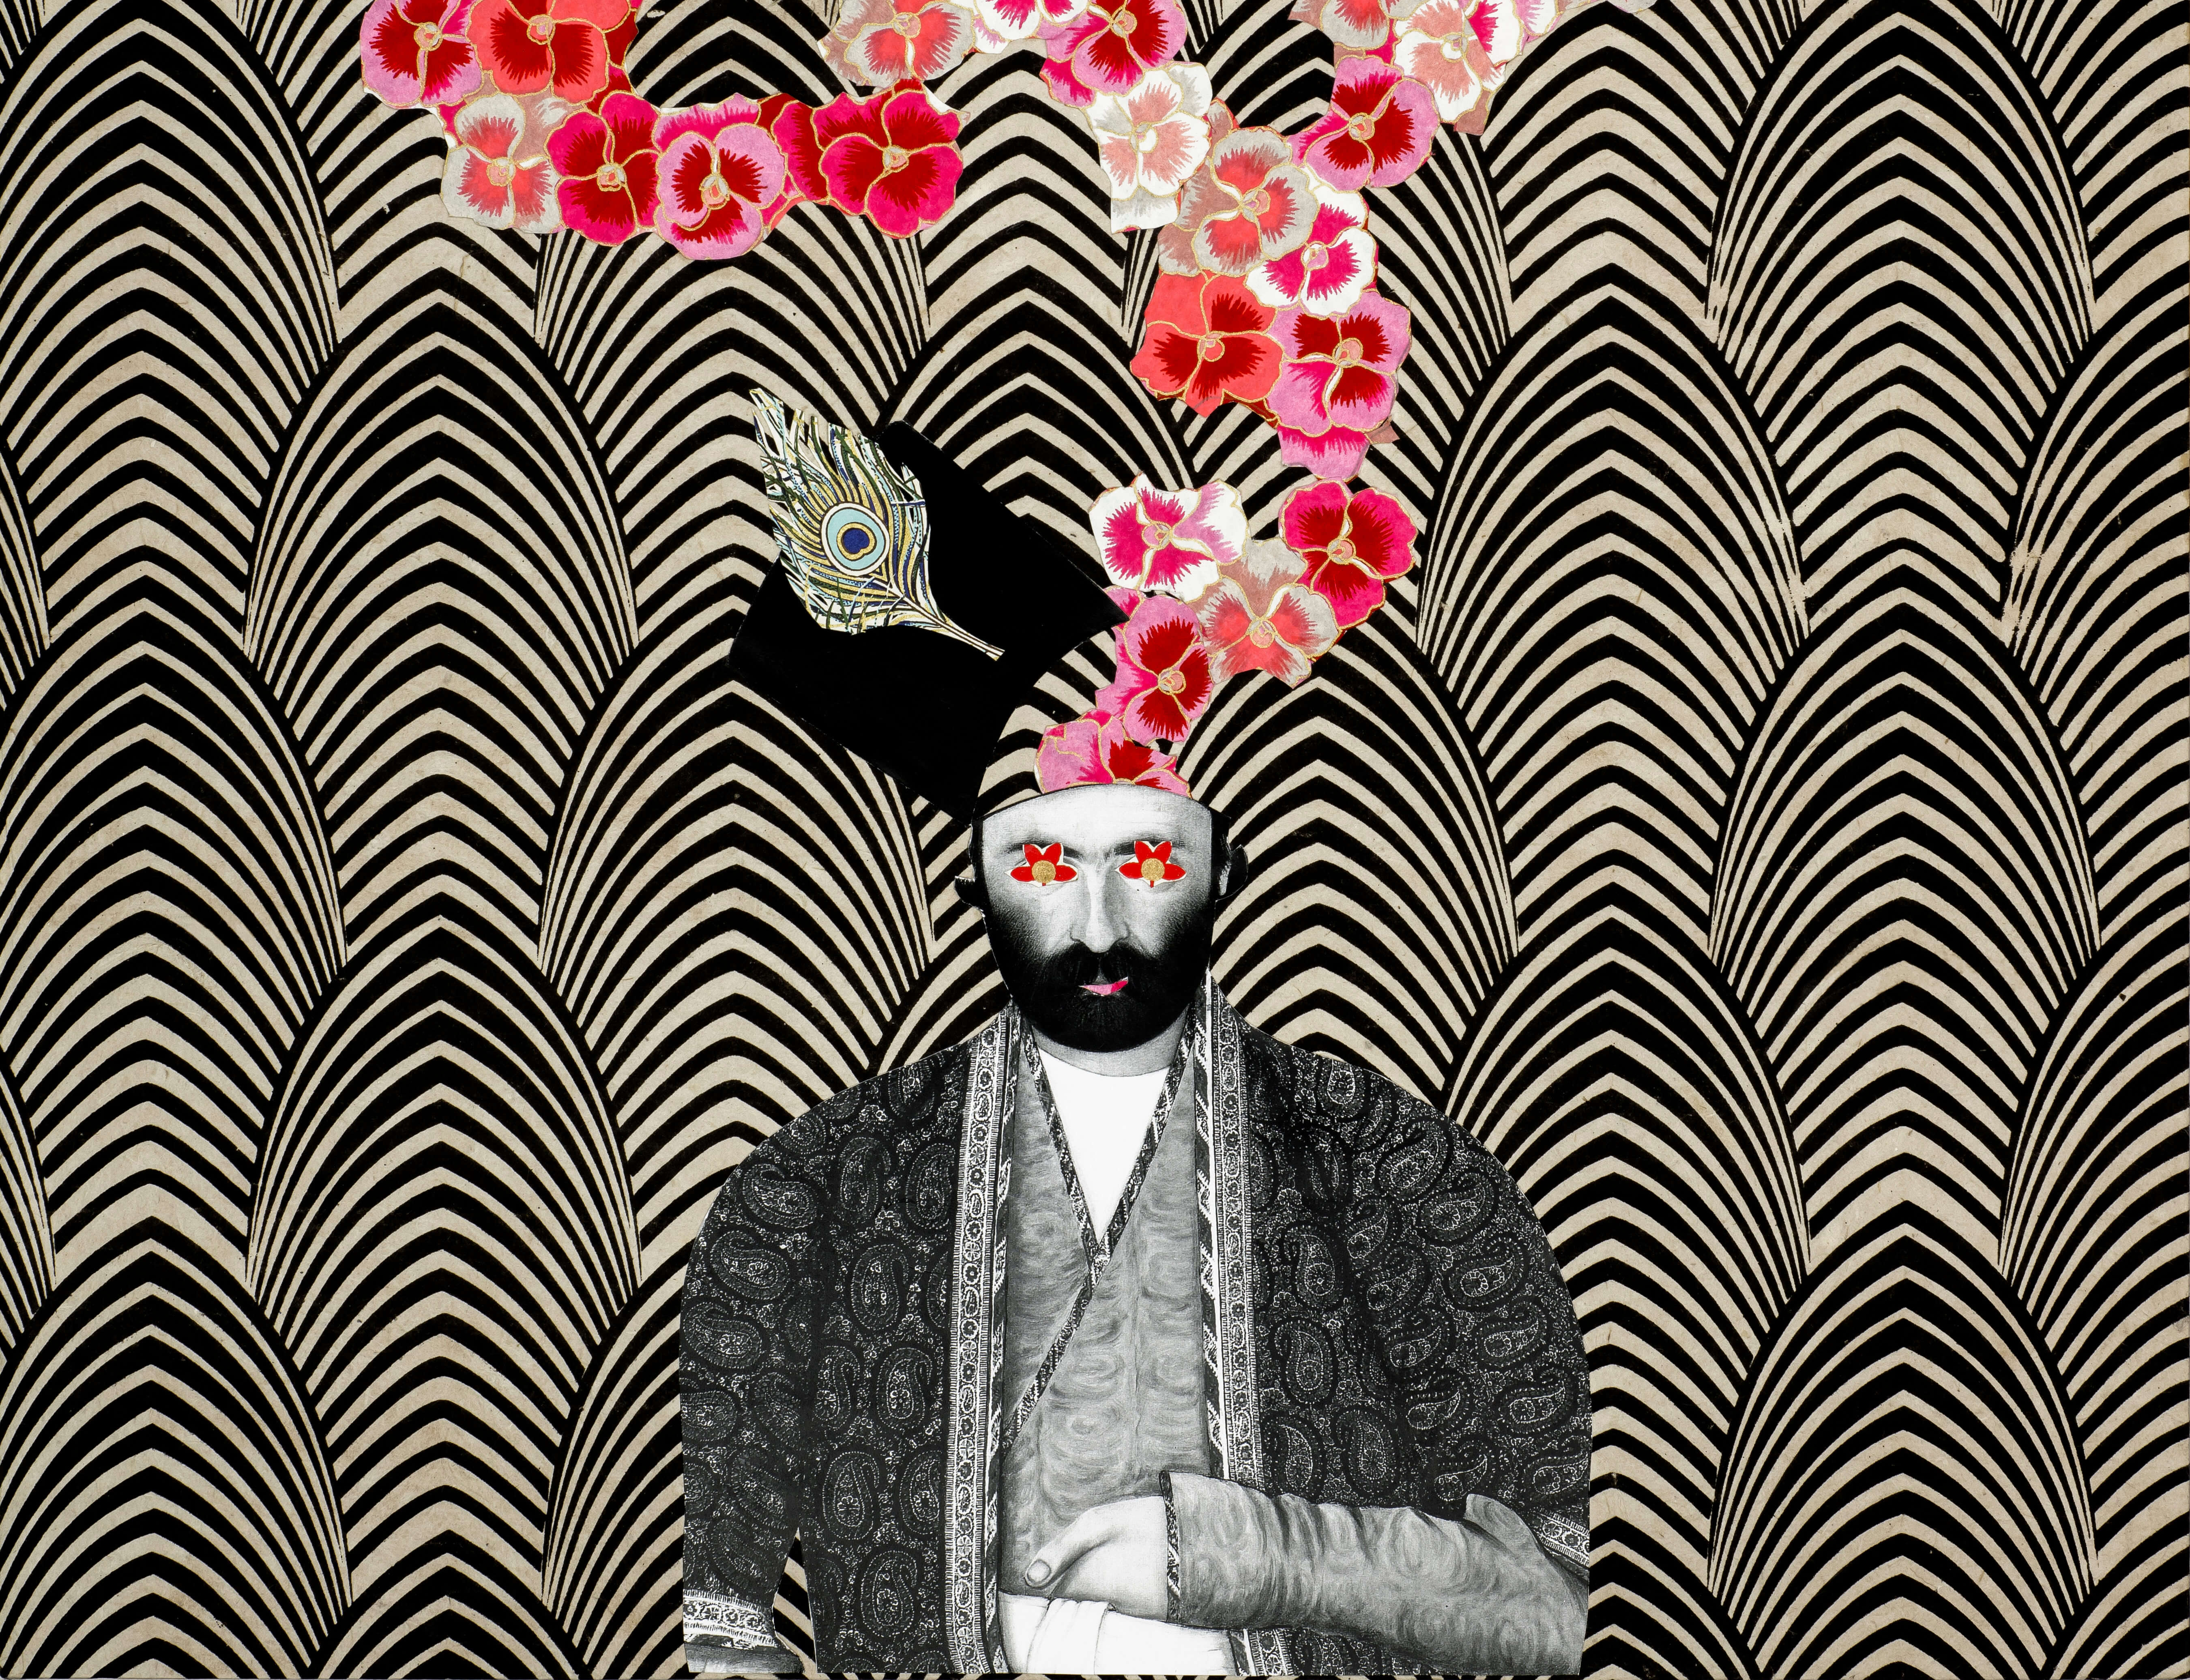 Thinking Good Thoughts I [collage] by artist Sheila Karbassian